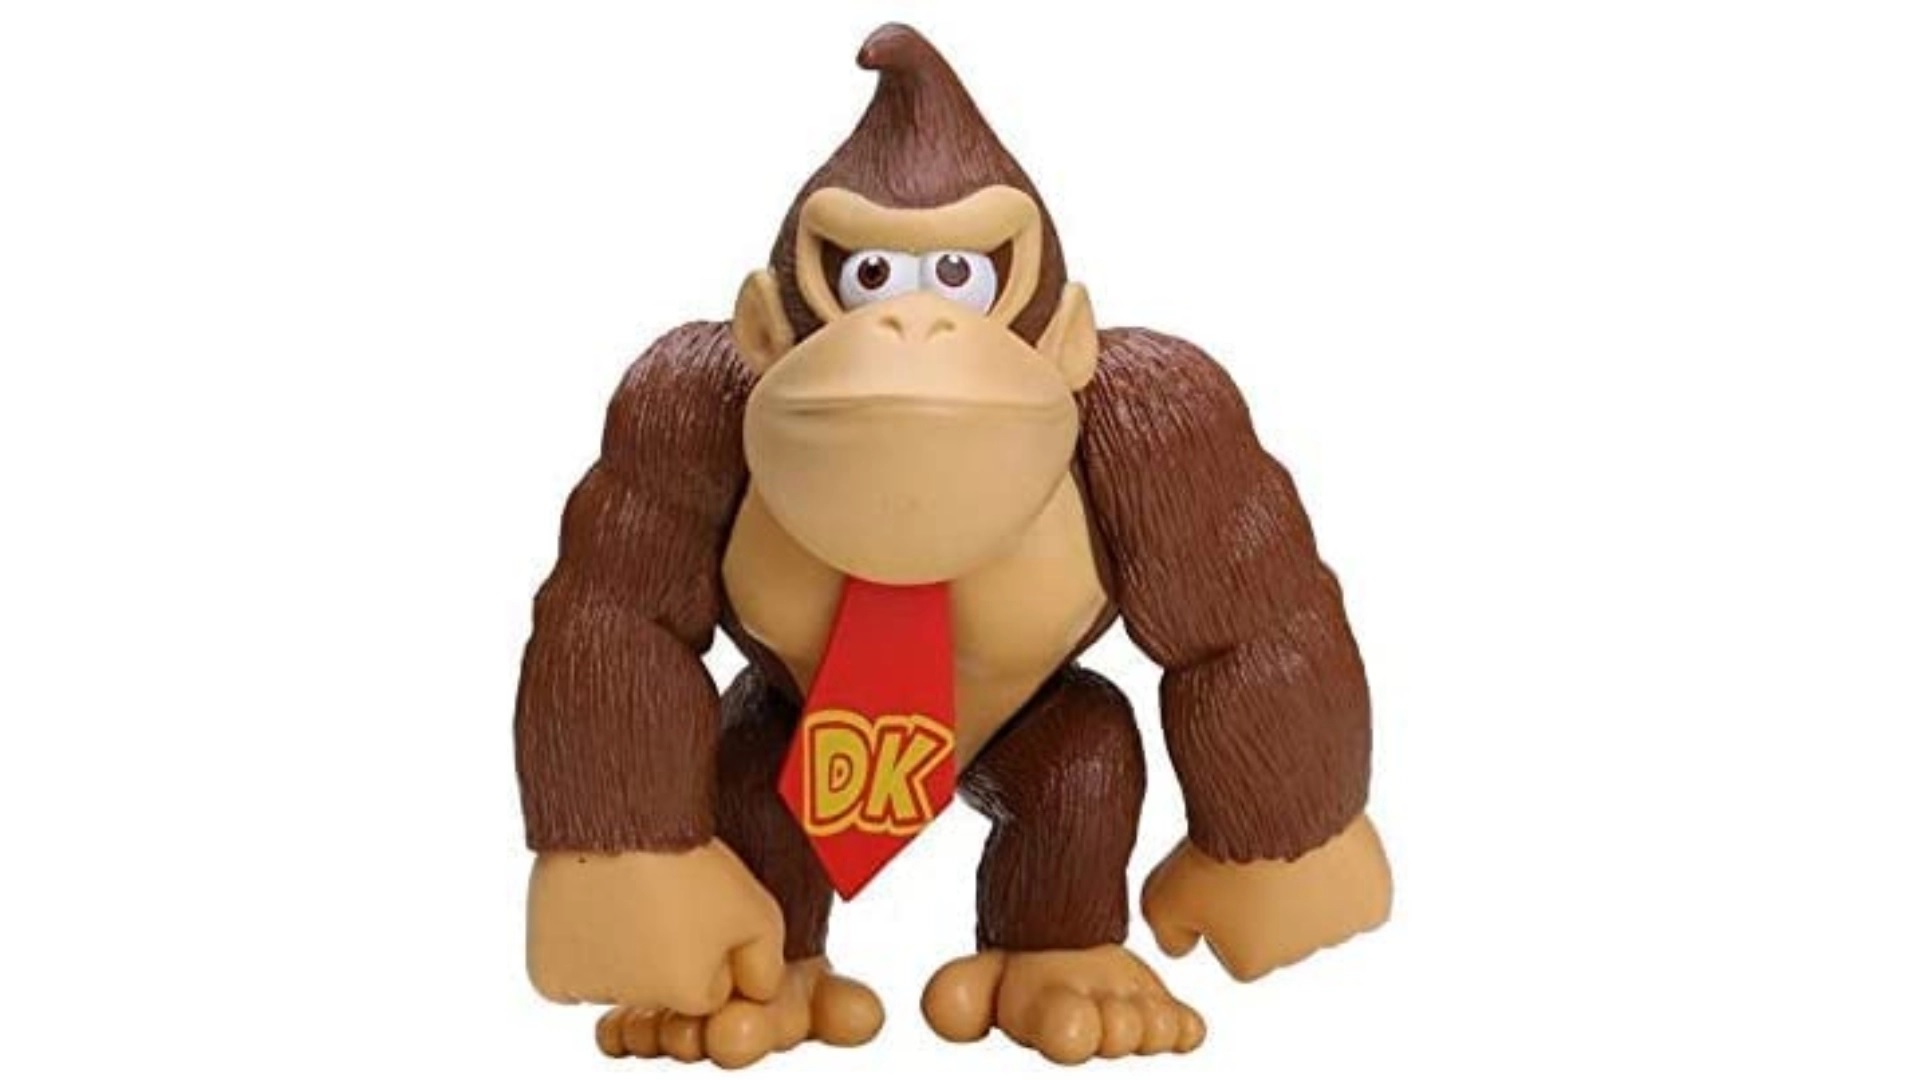 Nintendo gifts: image shows a Donkey Kong action figure.